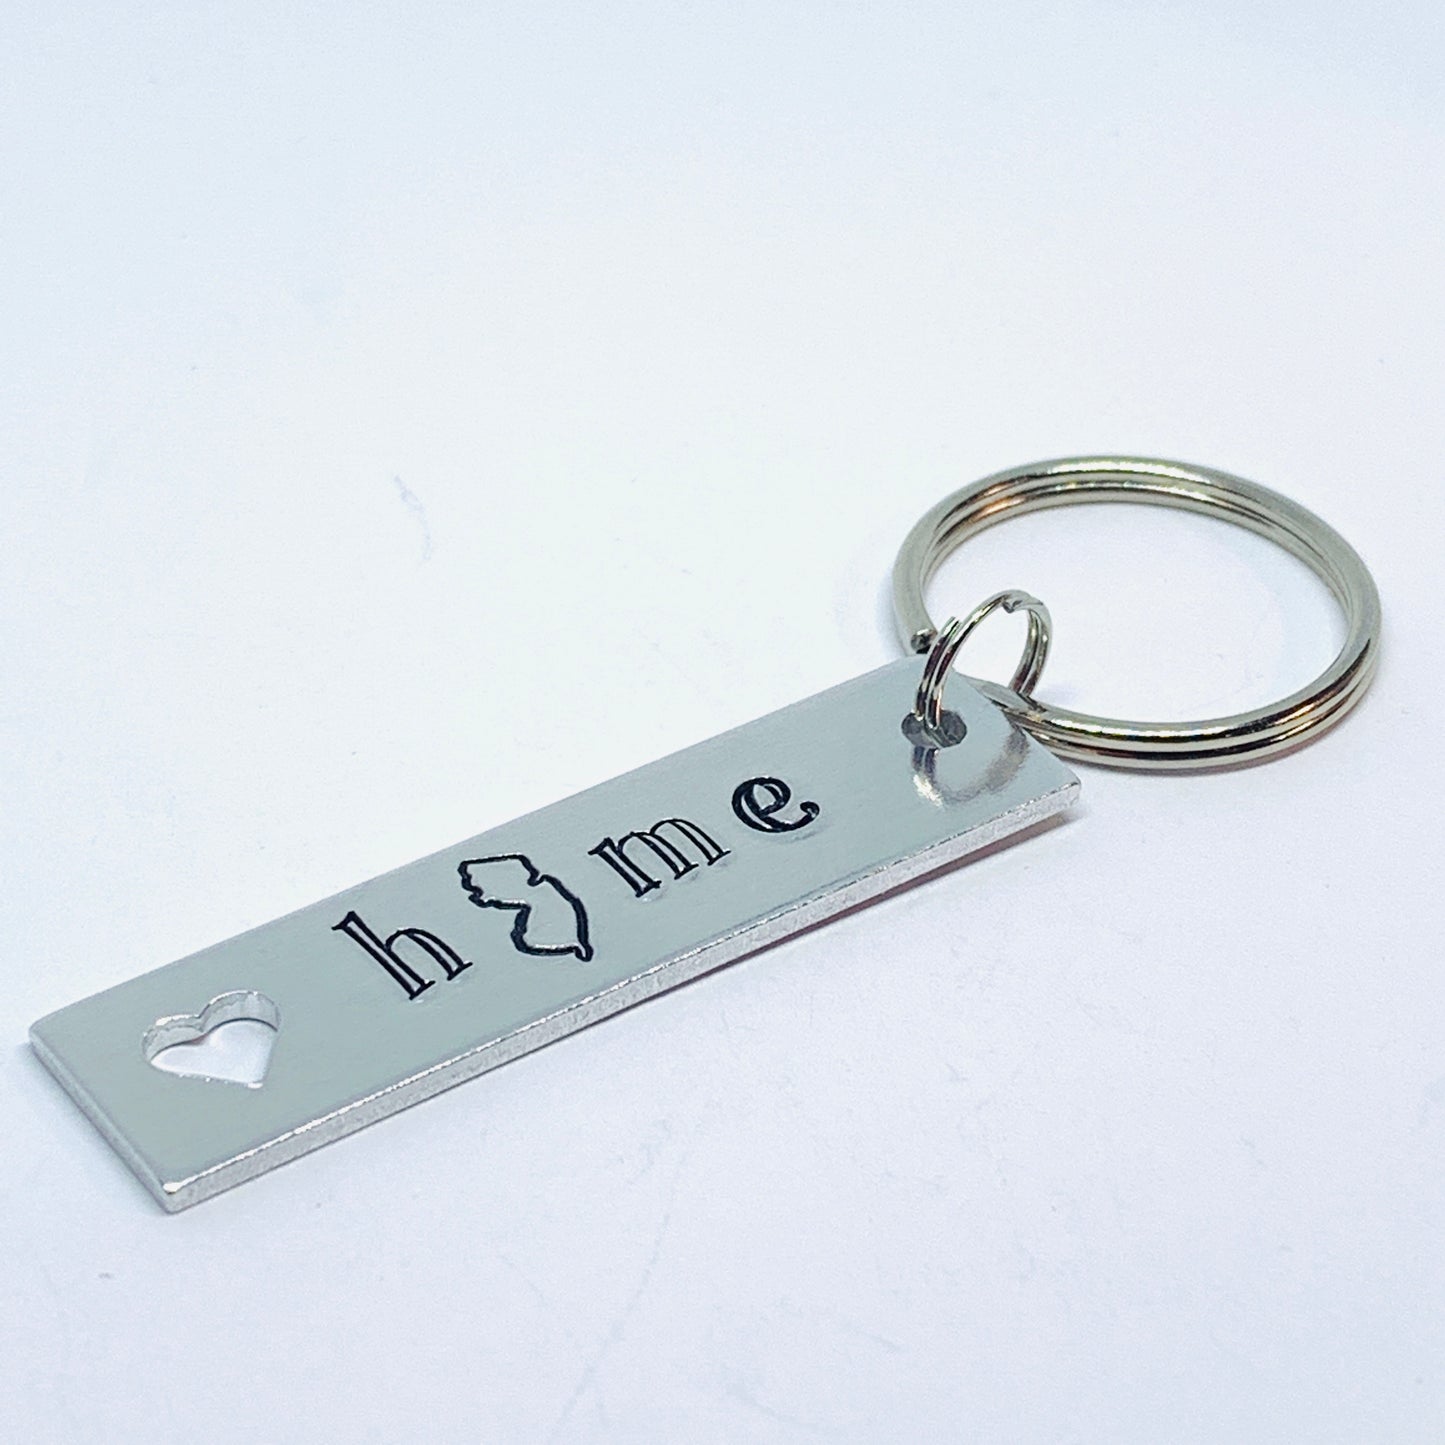 NJ Home - Hand Stamped Key Ring